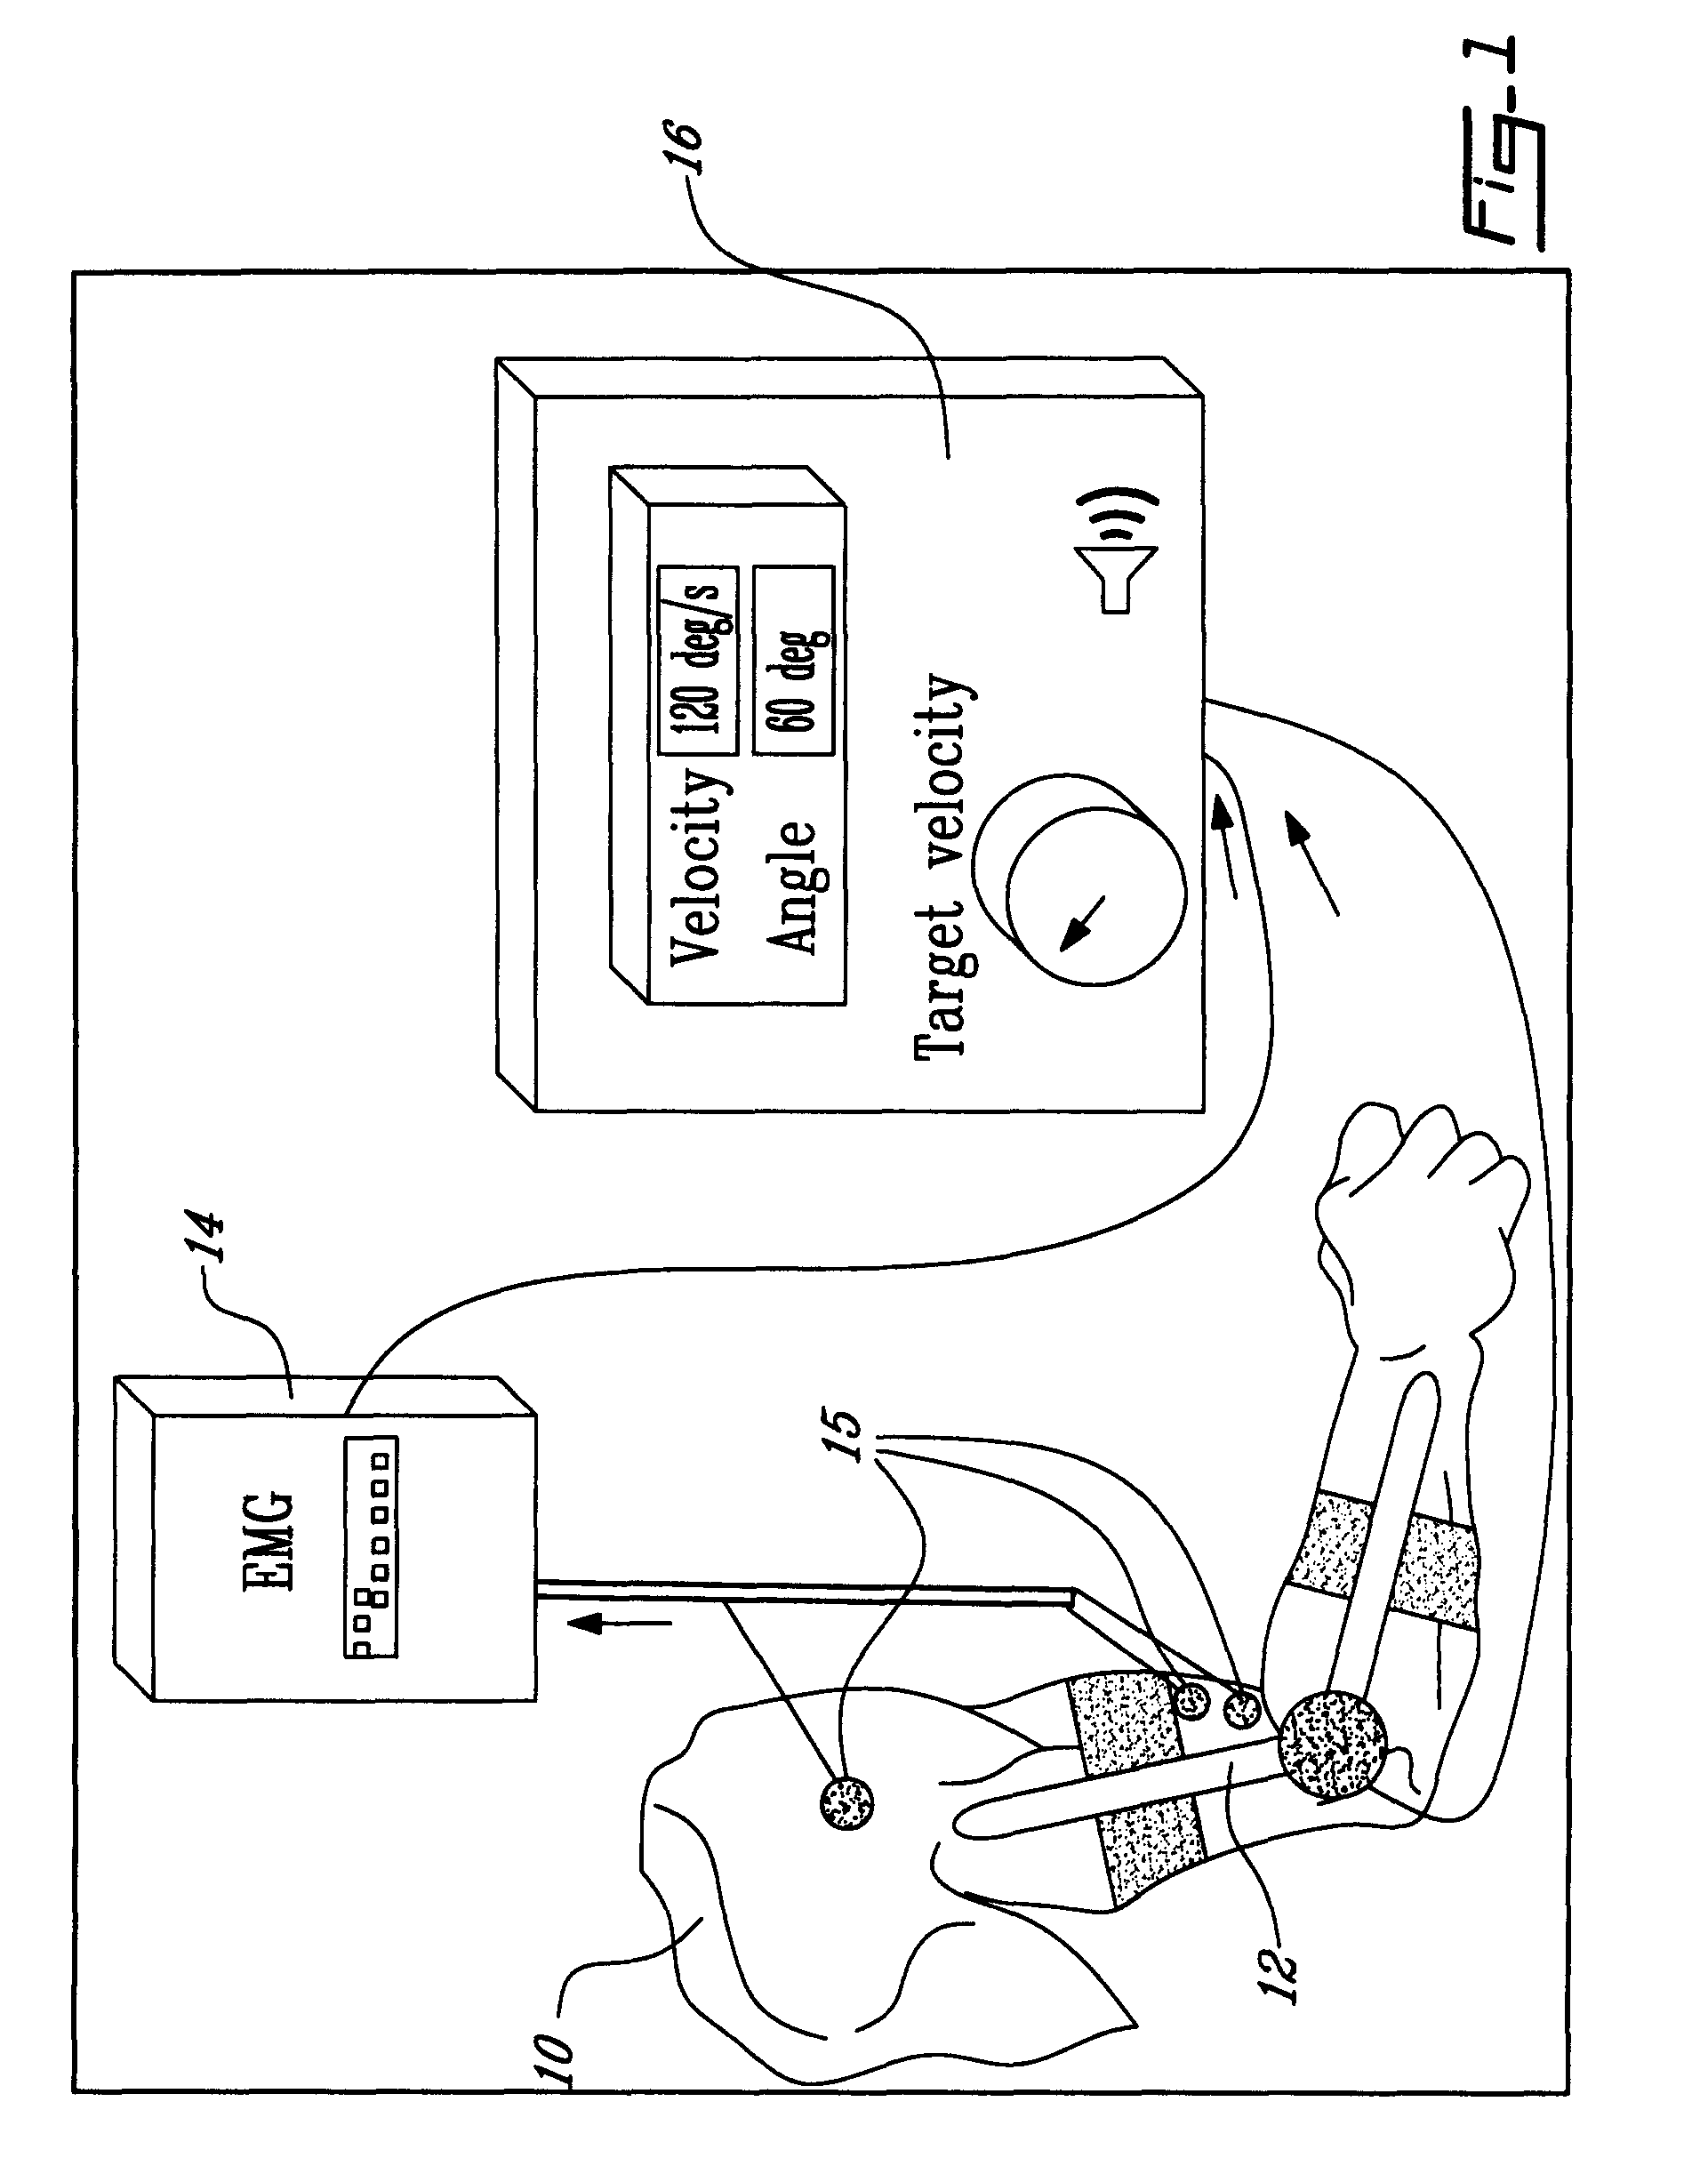 Method and apparatus for determining spasticity